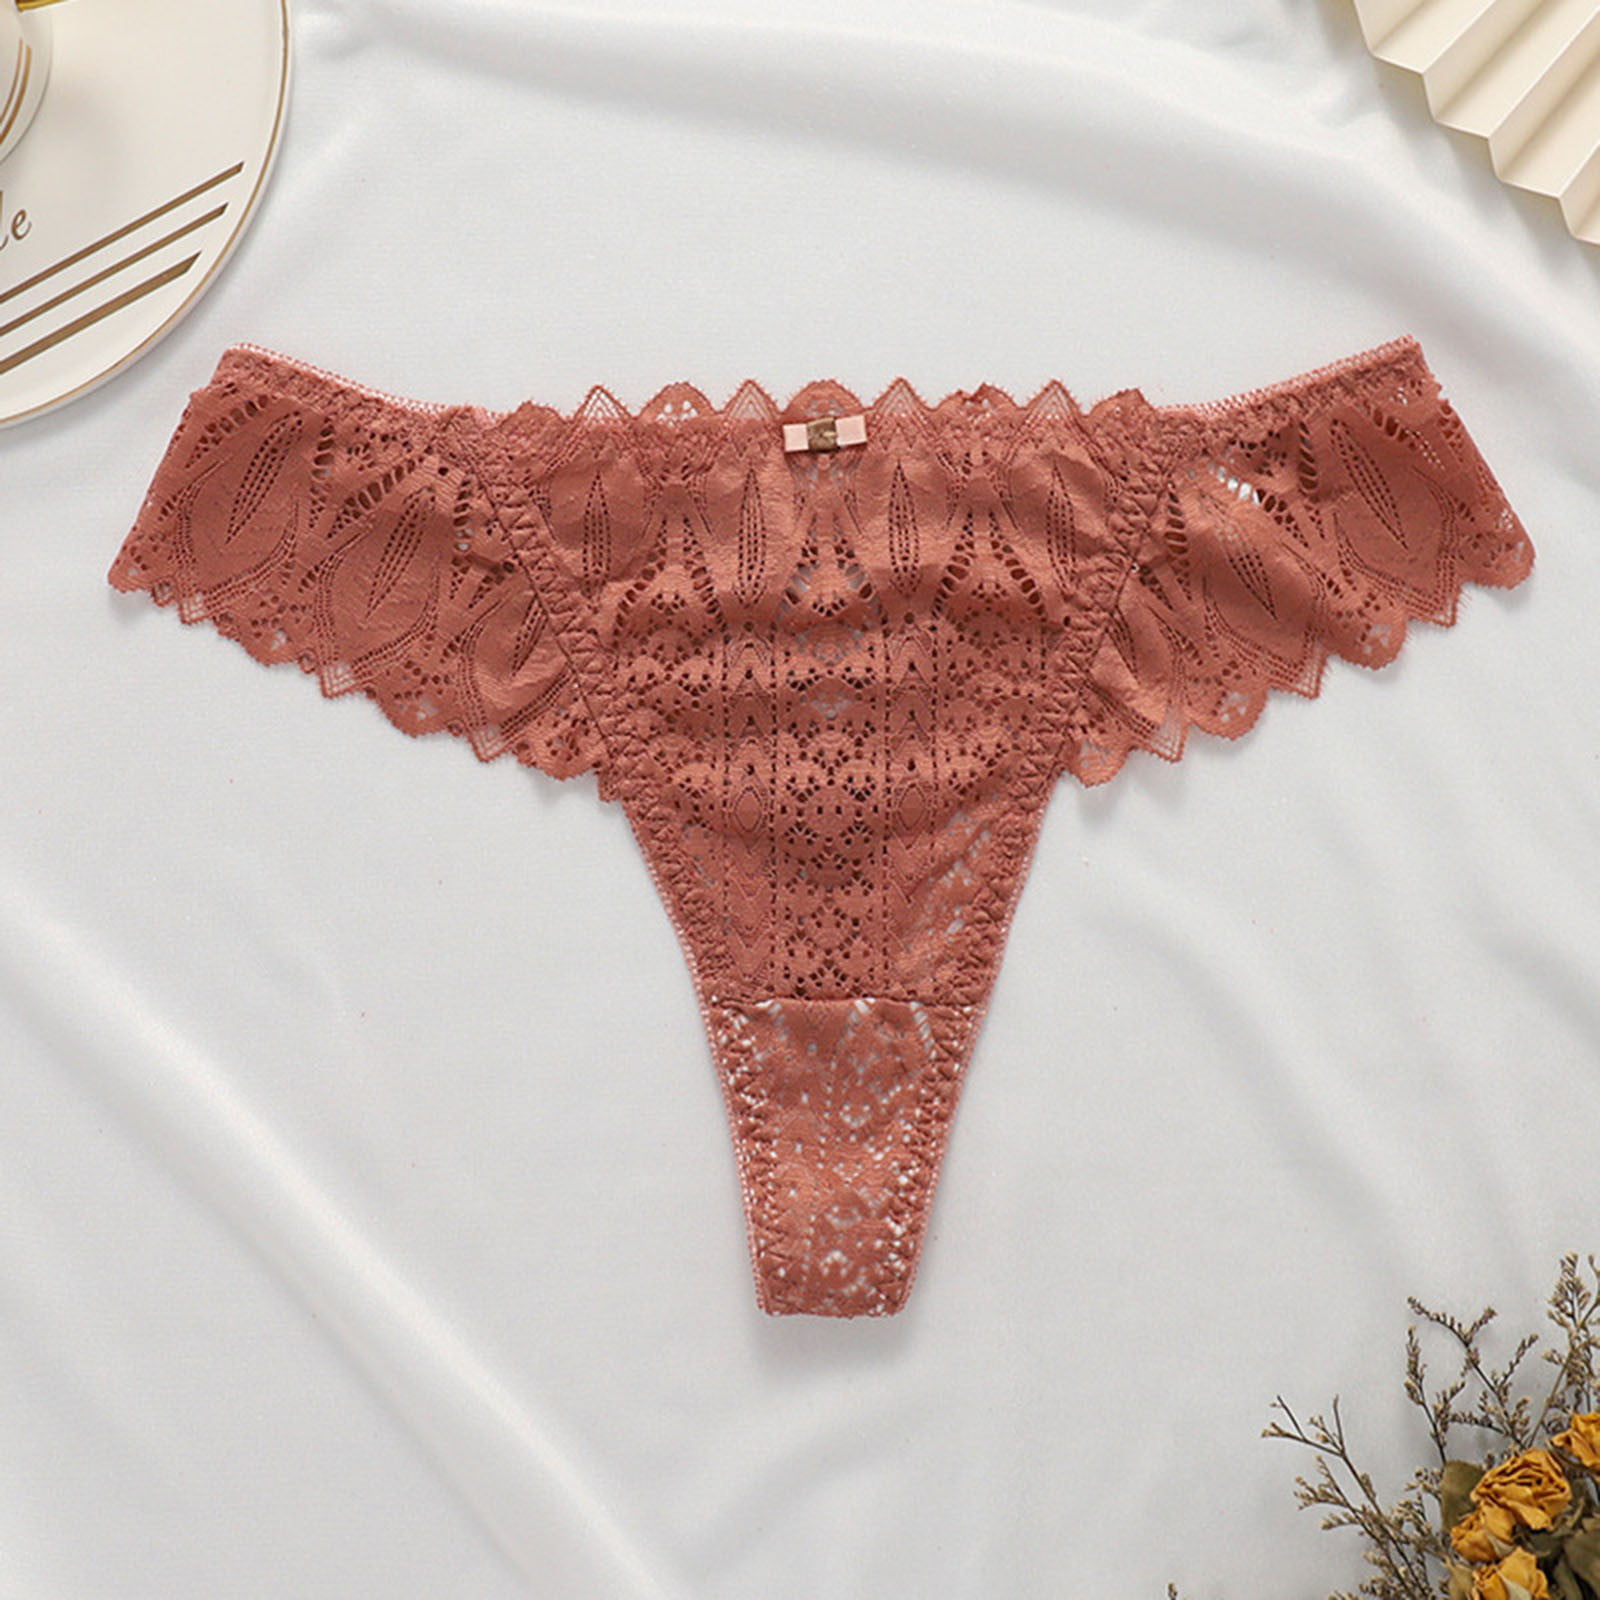 JDEFEG Women Panties Lace Panties for Women New Women Lace Embroidered  Butterfly Fashionable Underpants G String Wedgie Leggings Women Underwear  Polyester Bronze L 